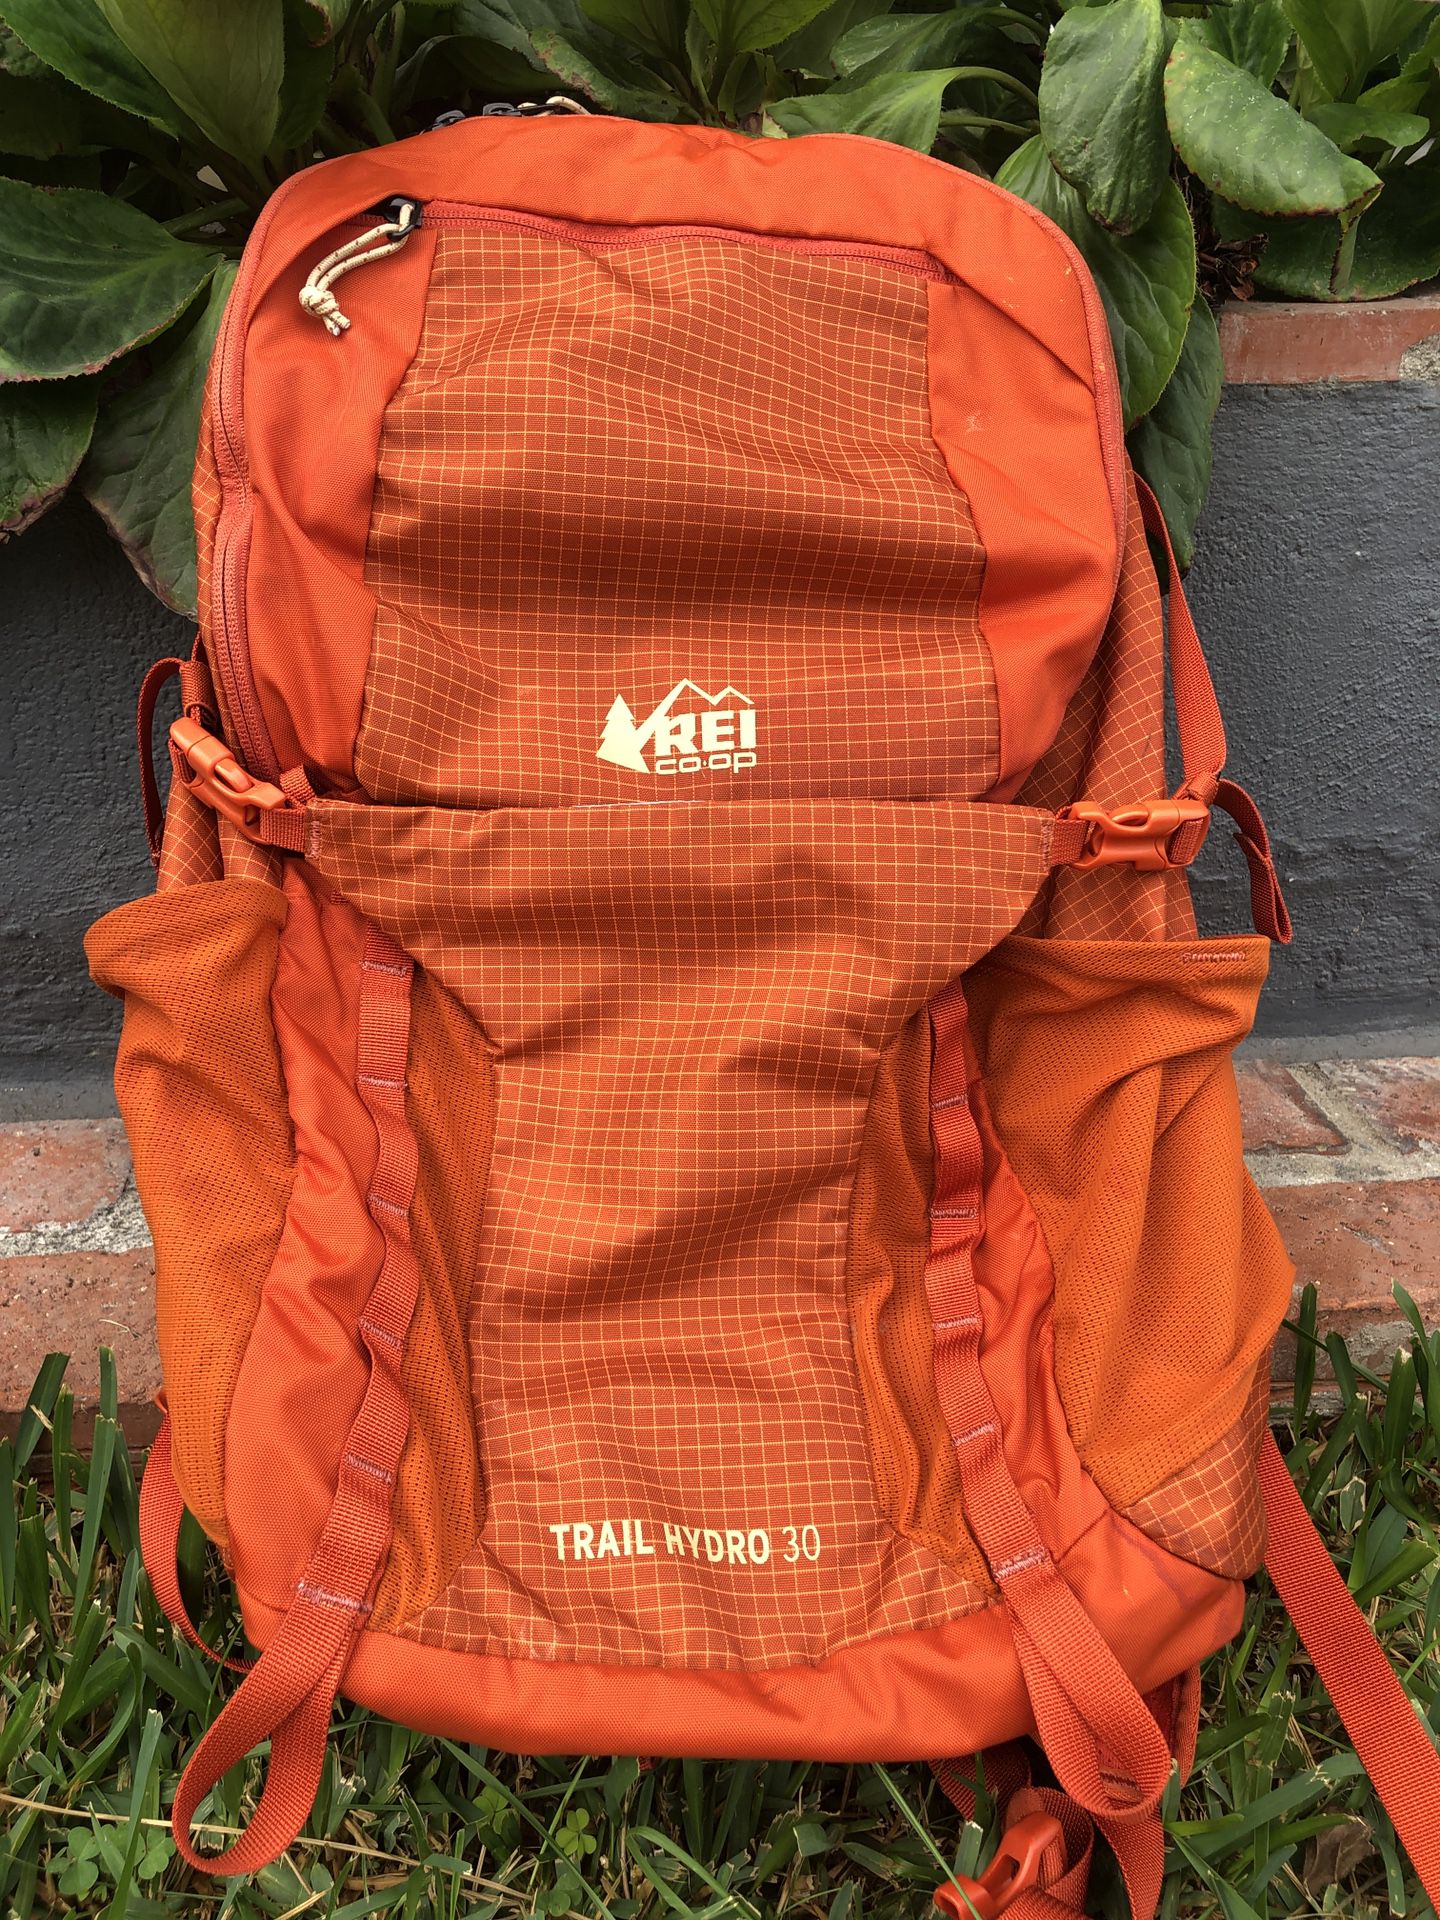 Pre-owned REI Coop Hiking Backpack without hydropack. 